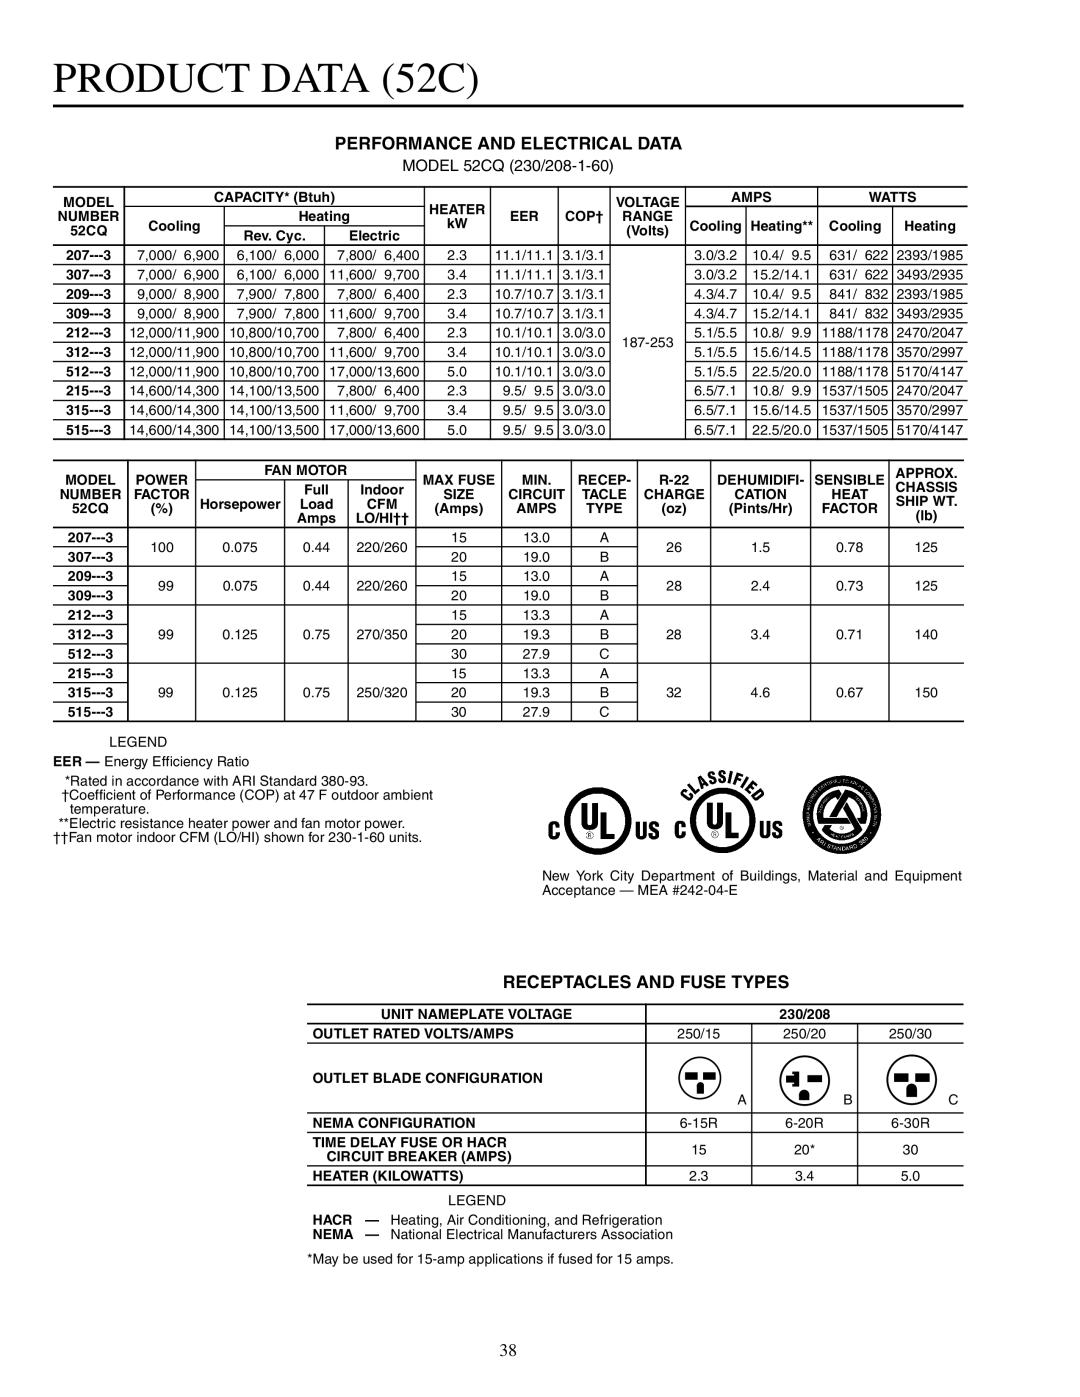 Carrier 592-085 PRODUCT DATA 52C, Performance And Electrical Data, Receptacles And Fuse Types, MODEL 52CQ 230/208-1-60 